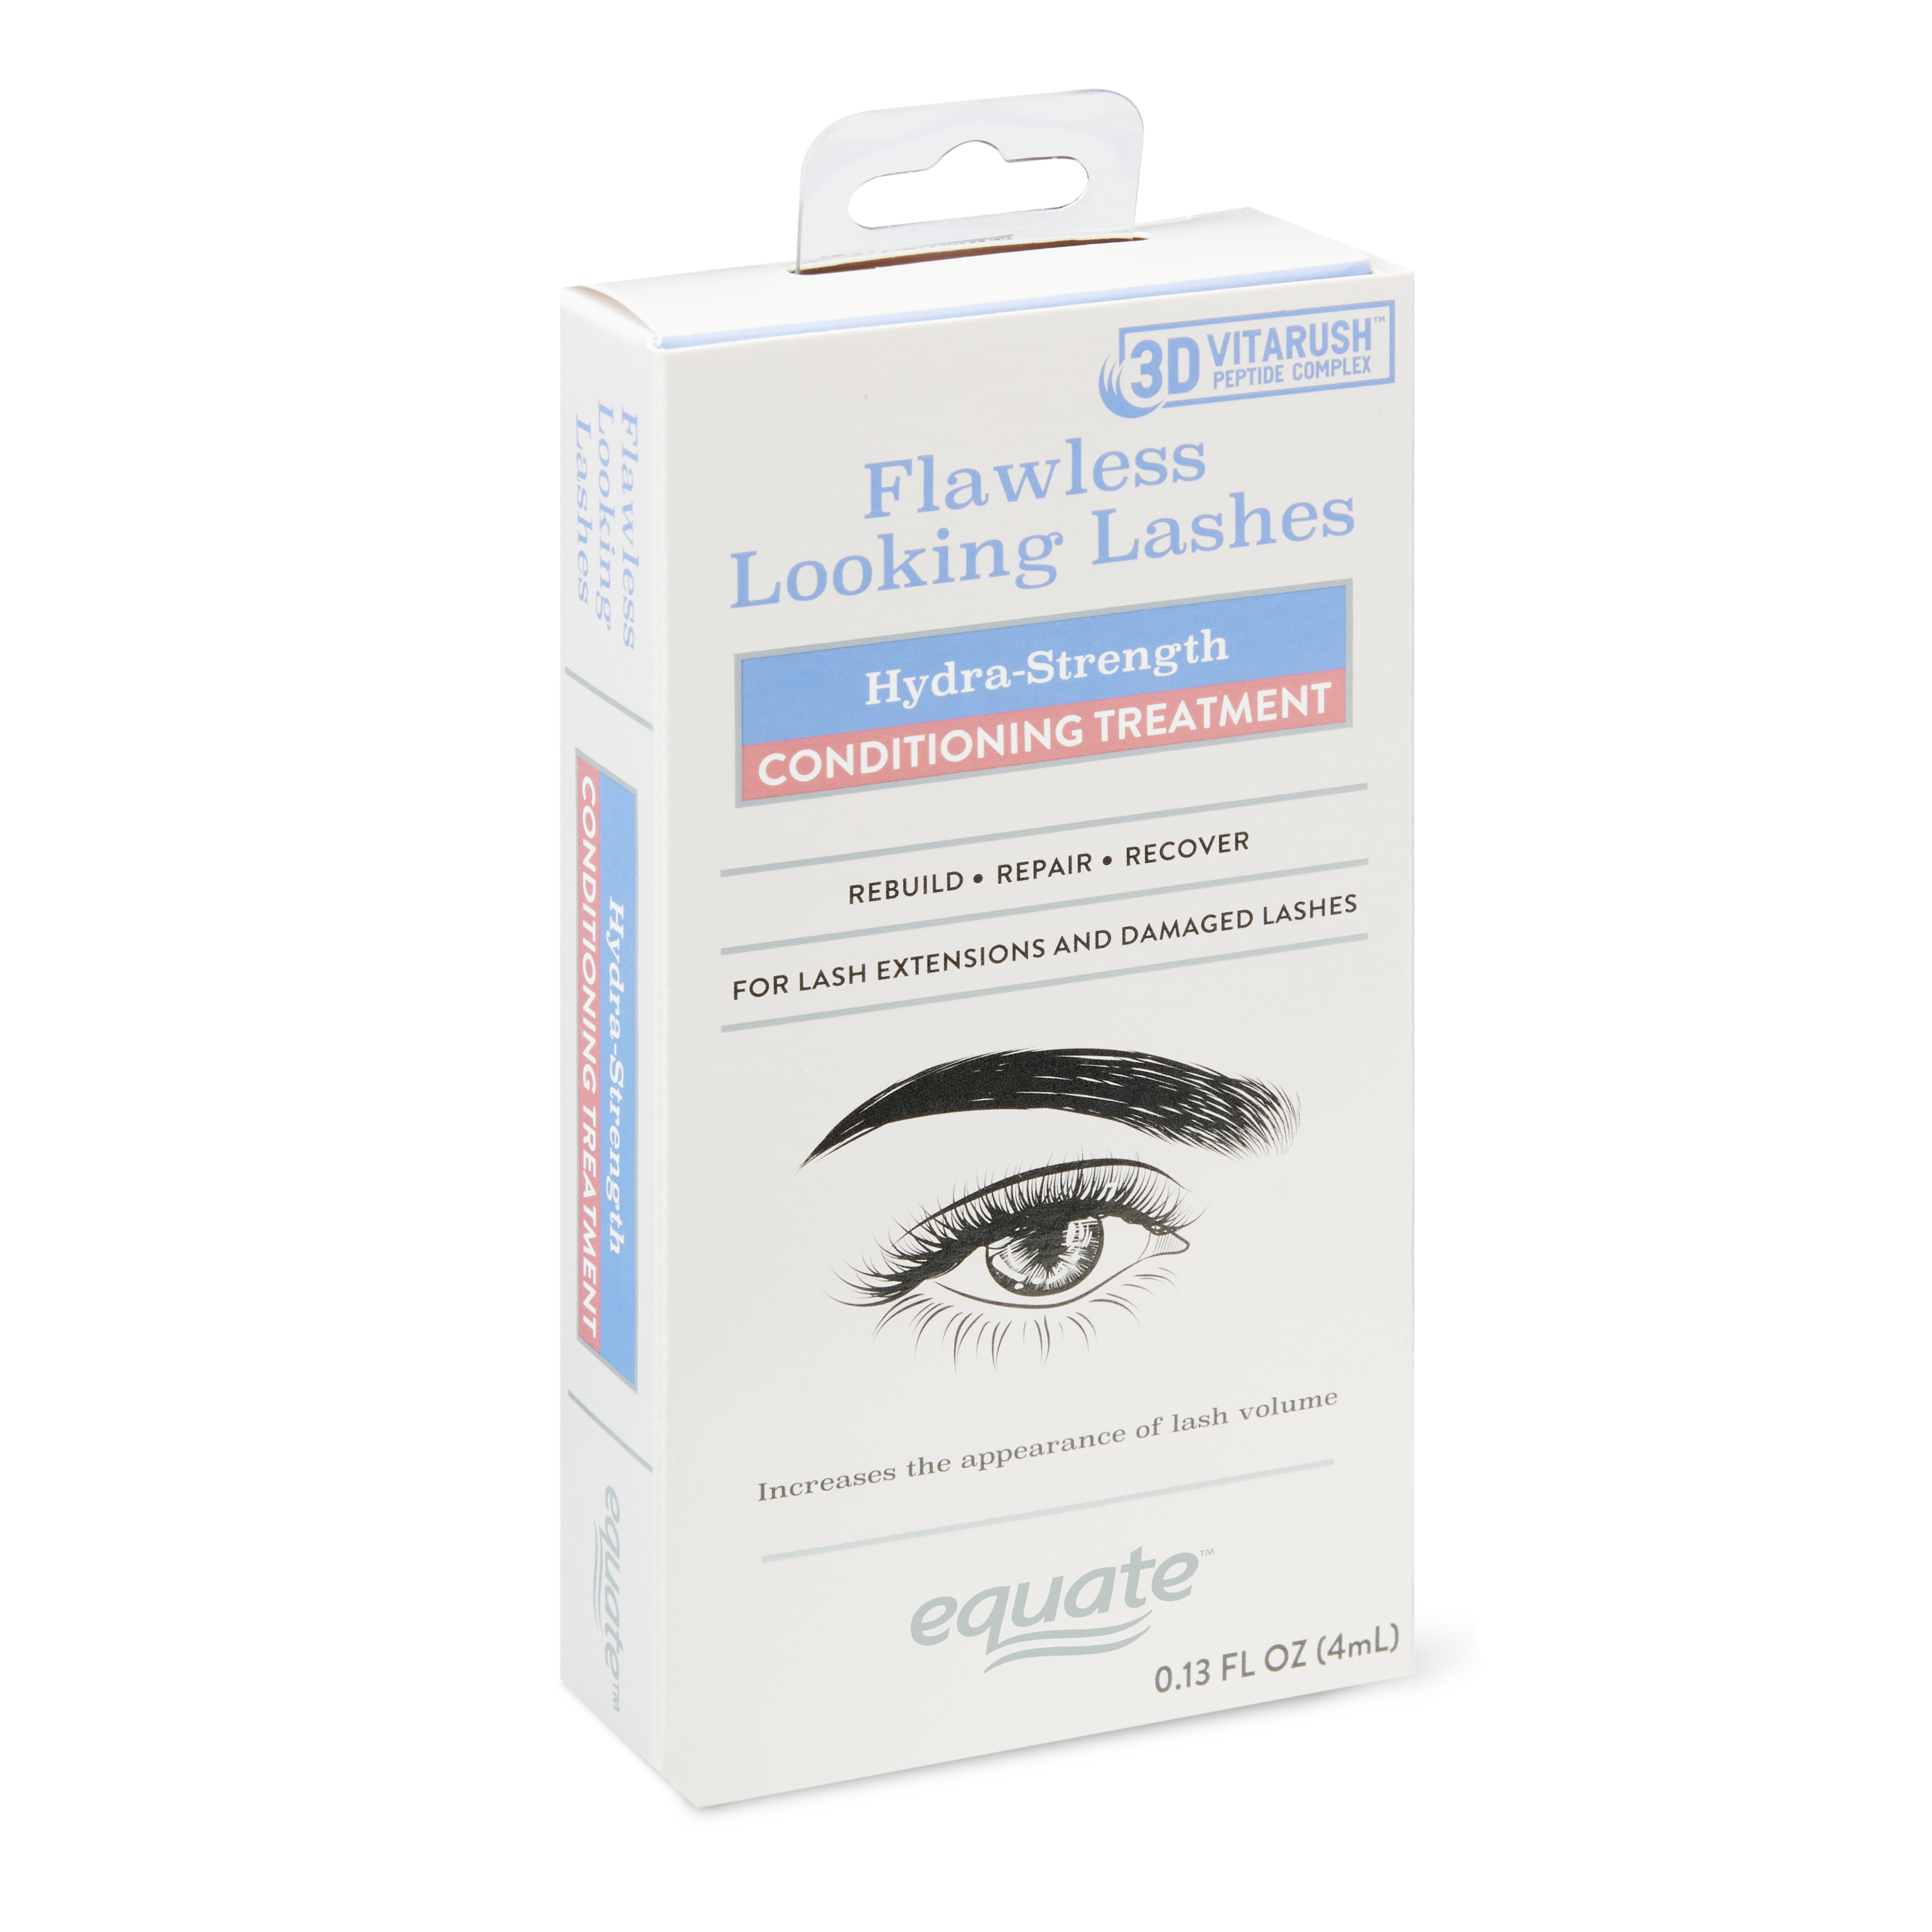 Equate Hydra-Strength Conditioning Lash Treatment with 3D VitaRush Peptide Complex - image 4 of 9